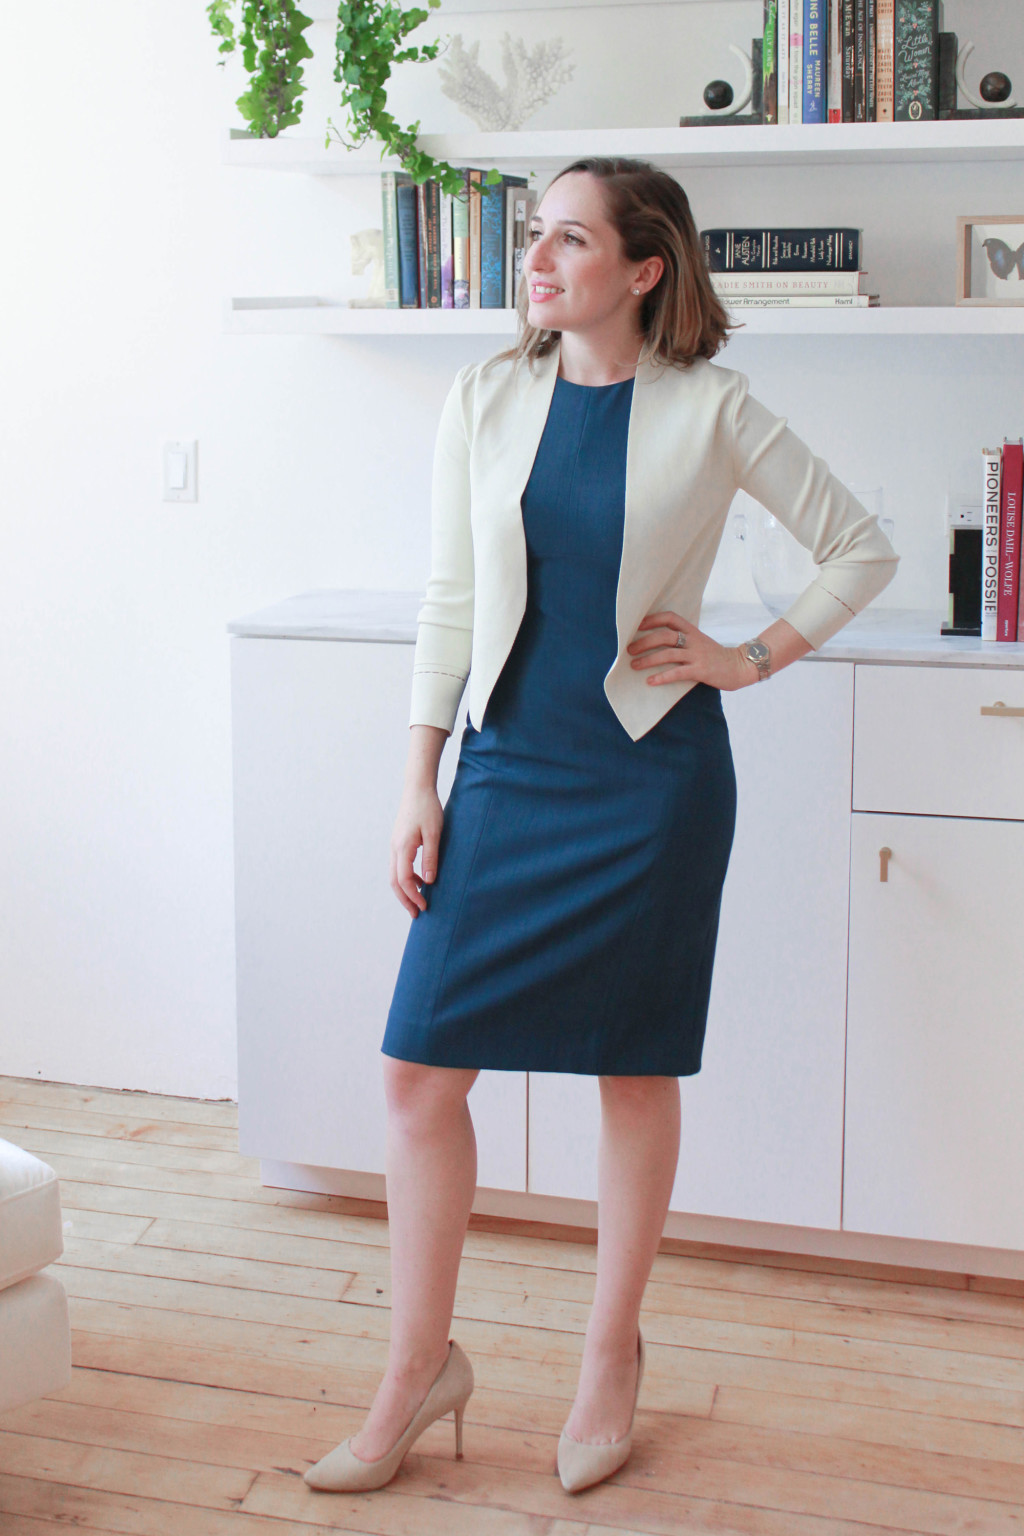 Work clothes for petite women